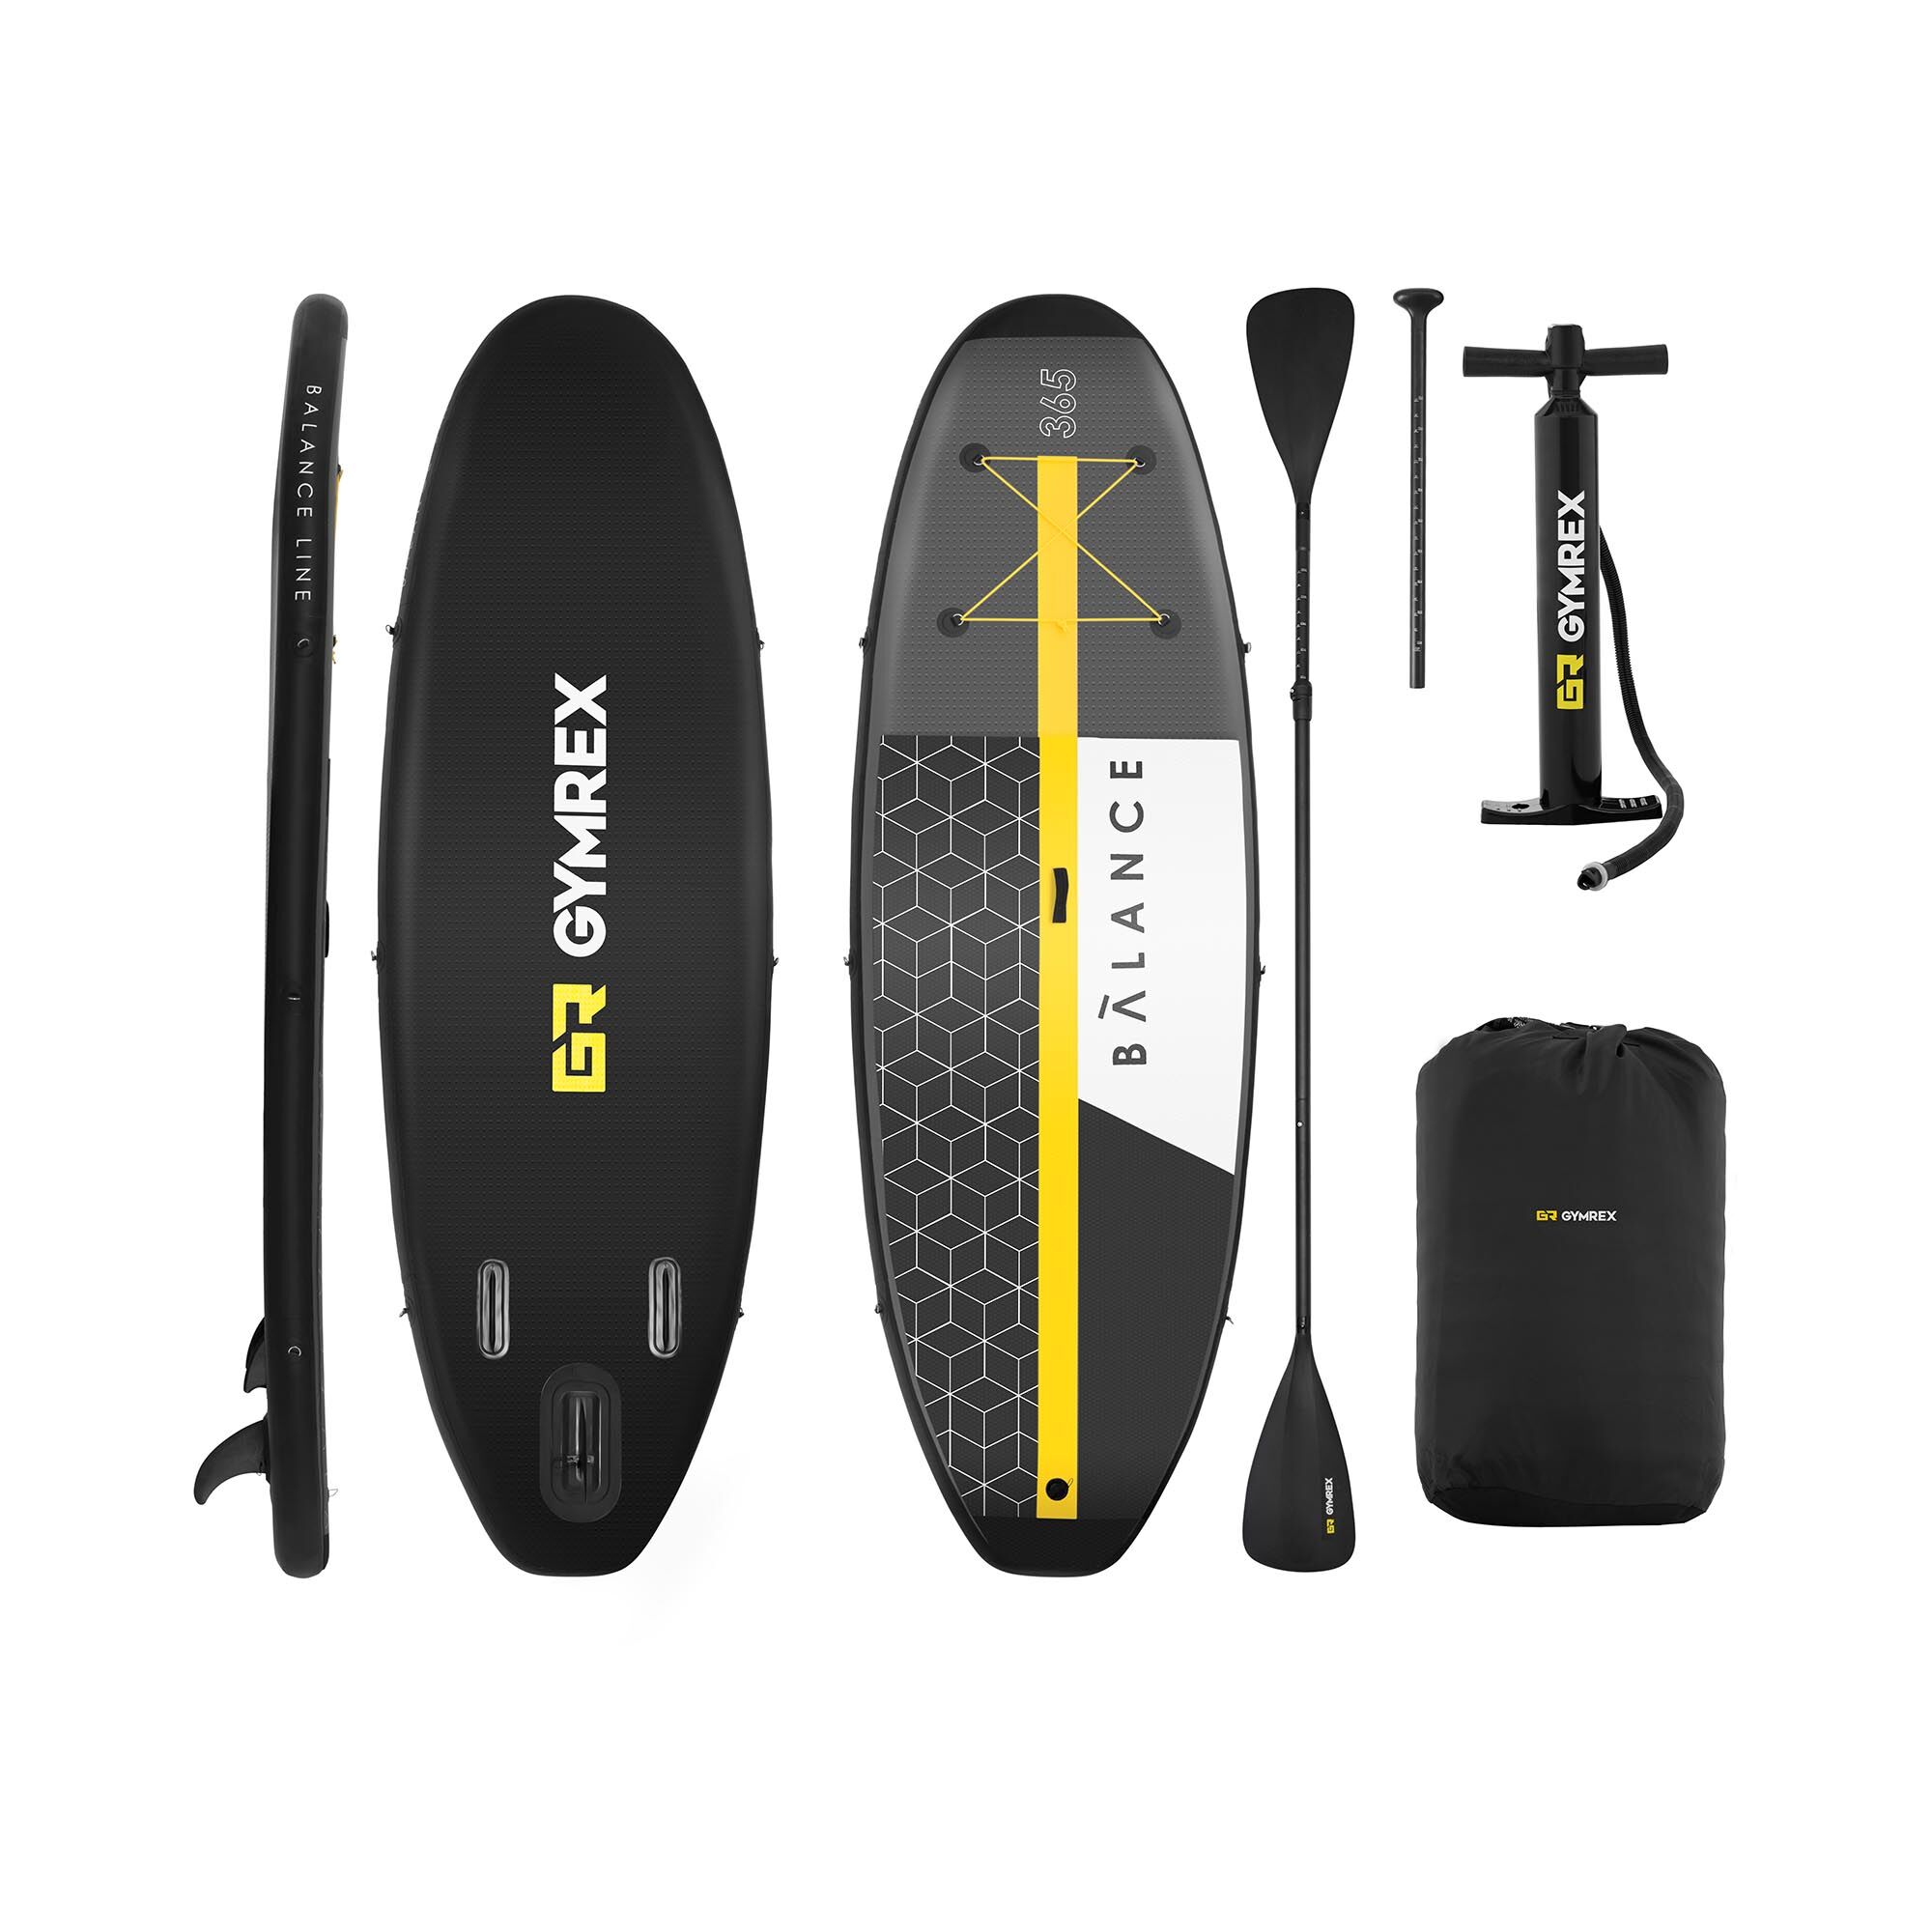 Gymrex Stand up paddle gonflable - 230 kg - 365 x 110 x 15 cm GR-SPB365